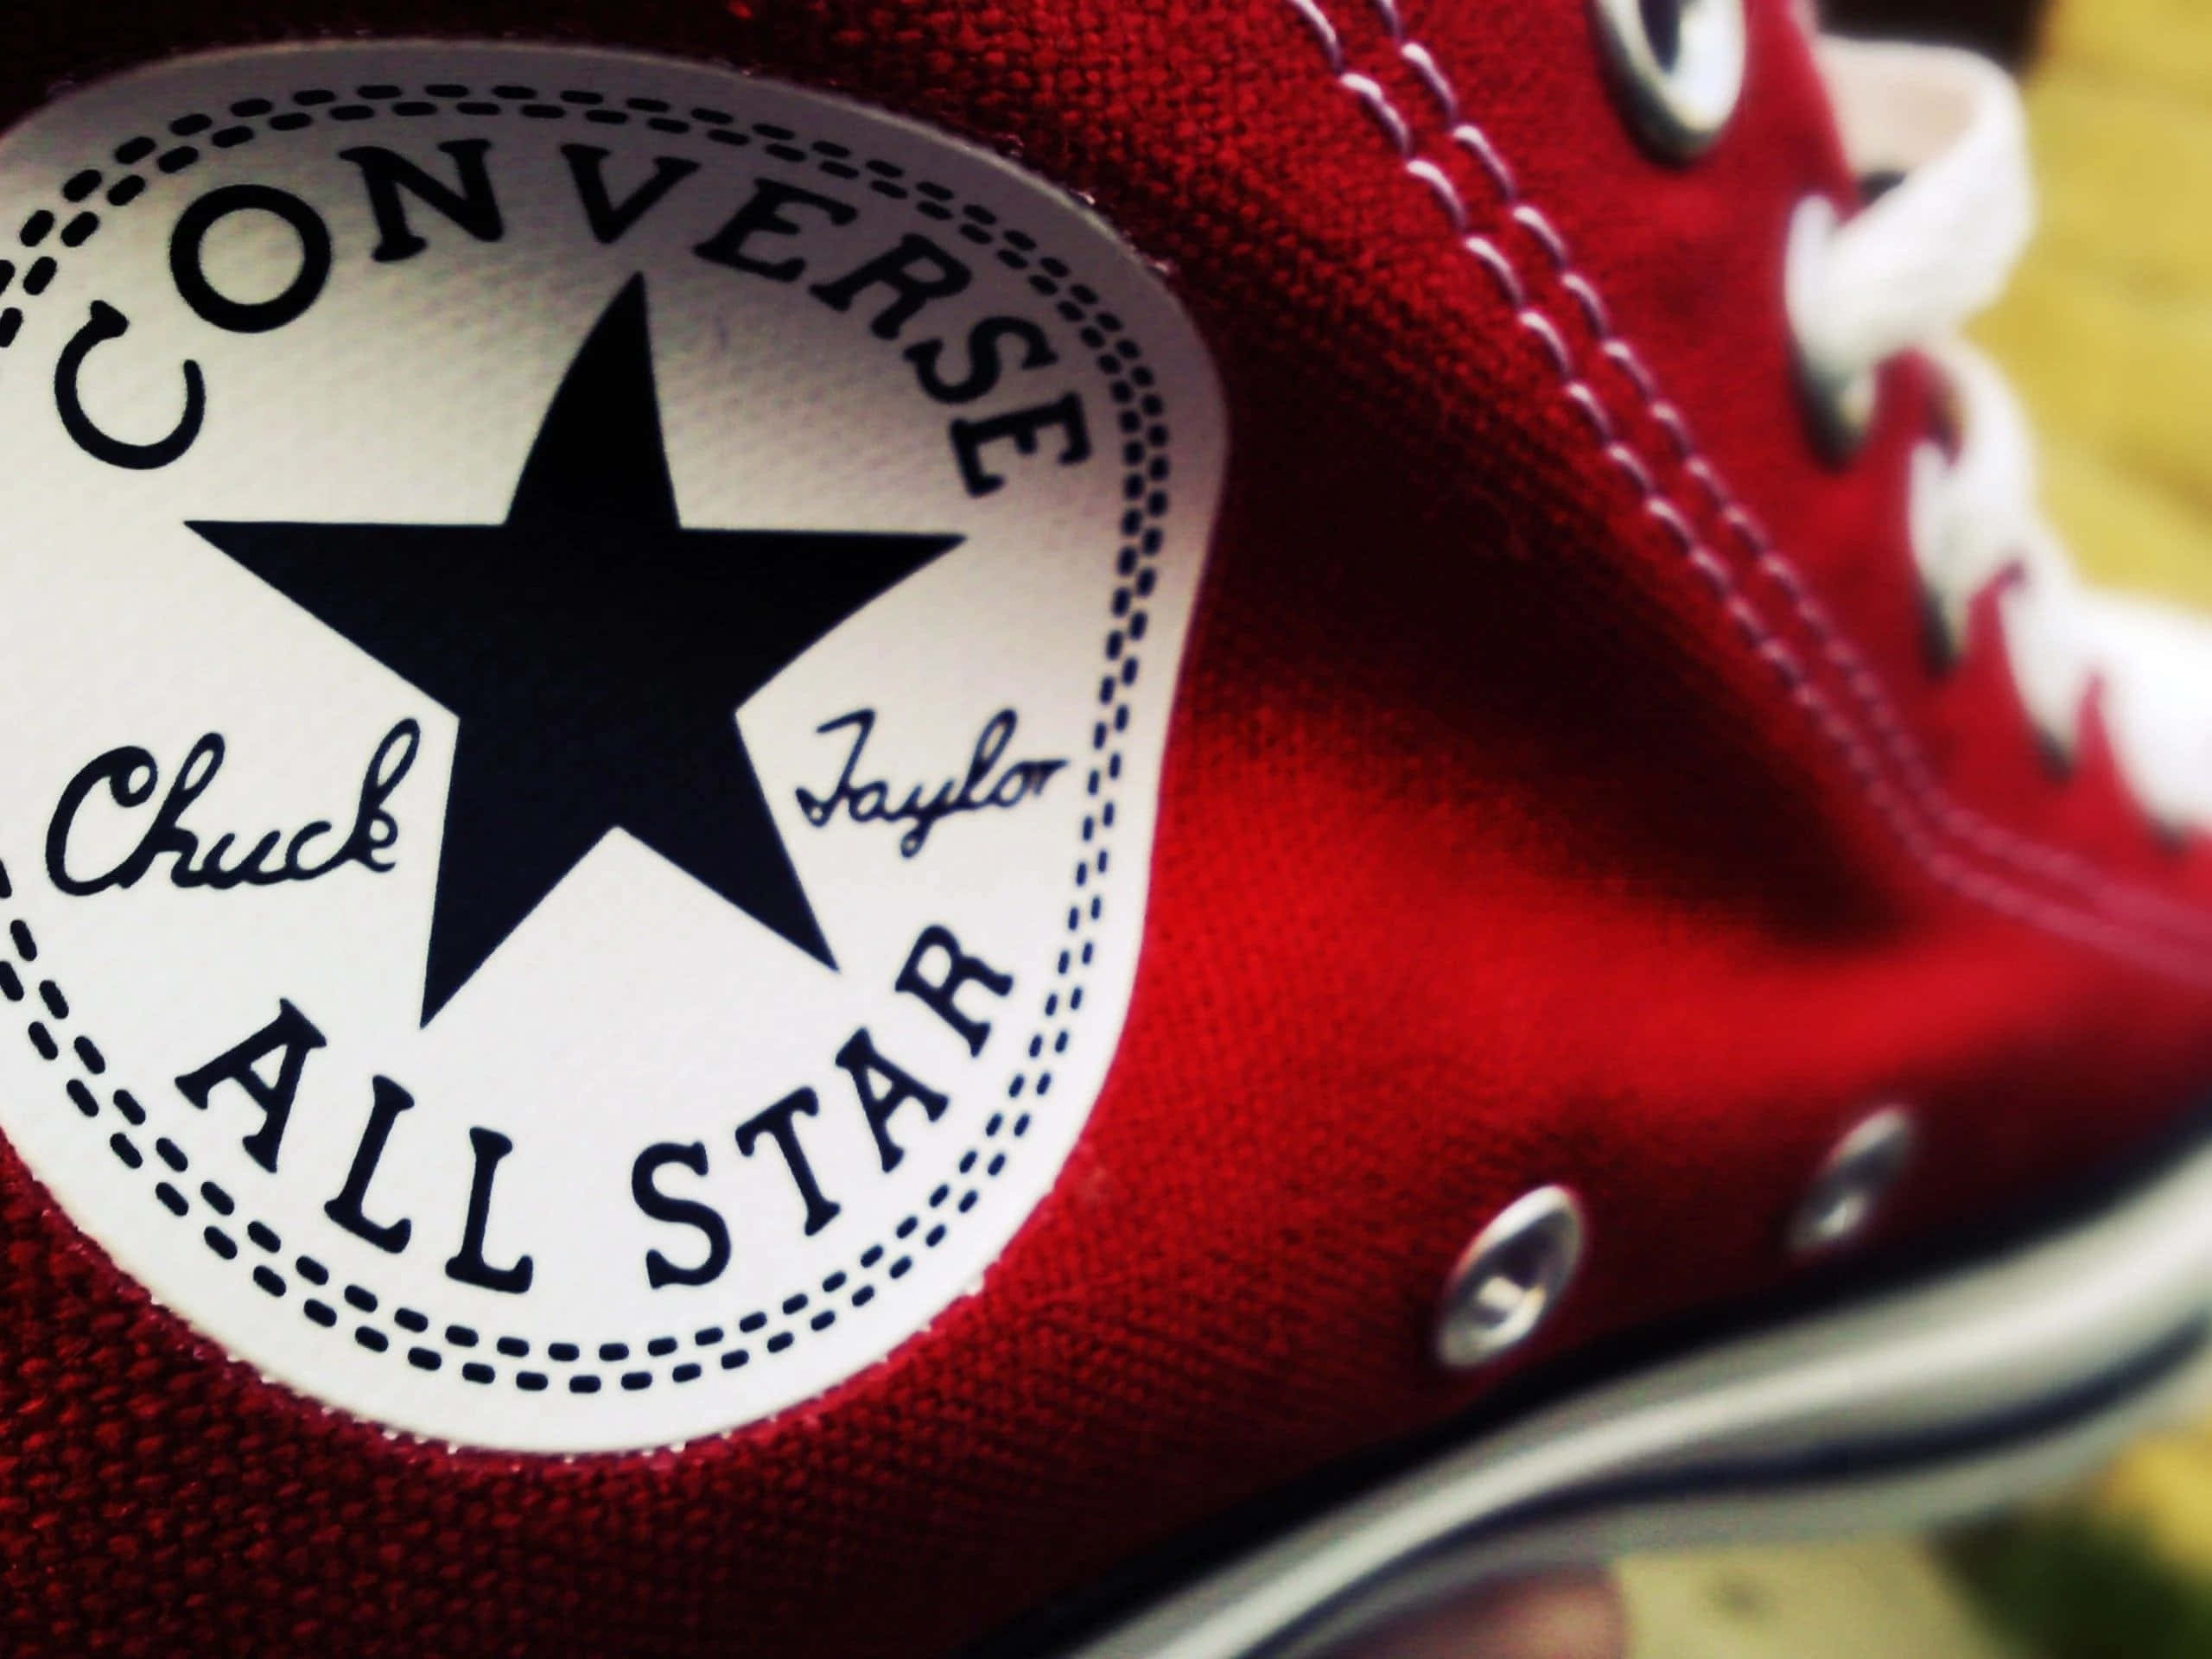 Converse Logo is a globally recognized symbol of self-expression and individuality